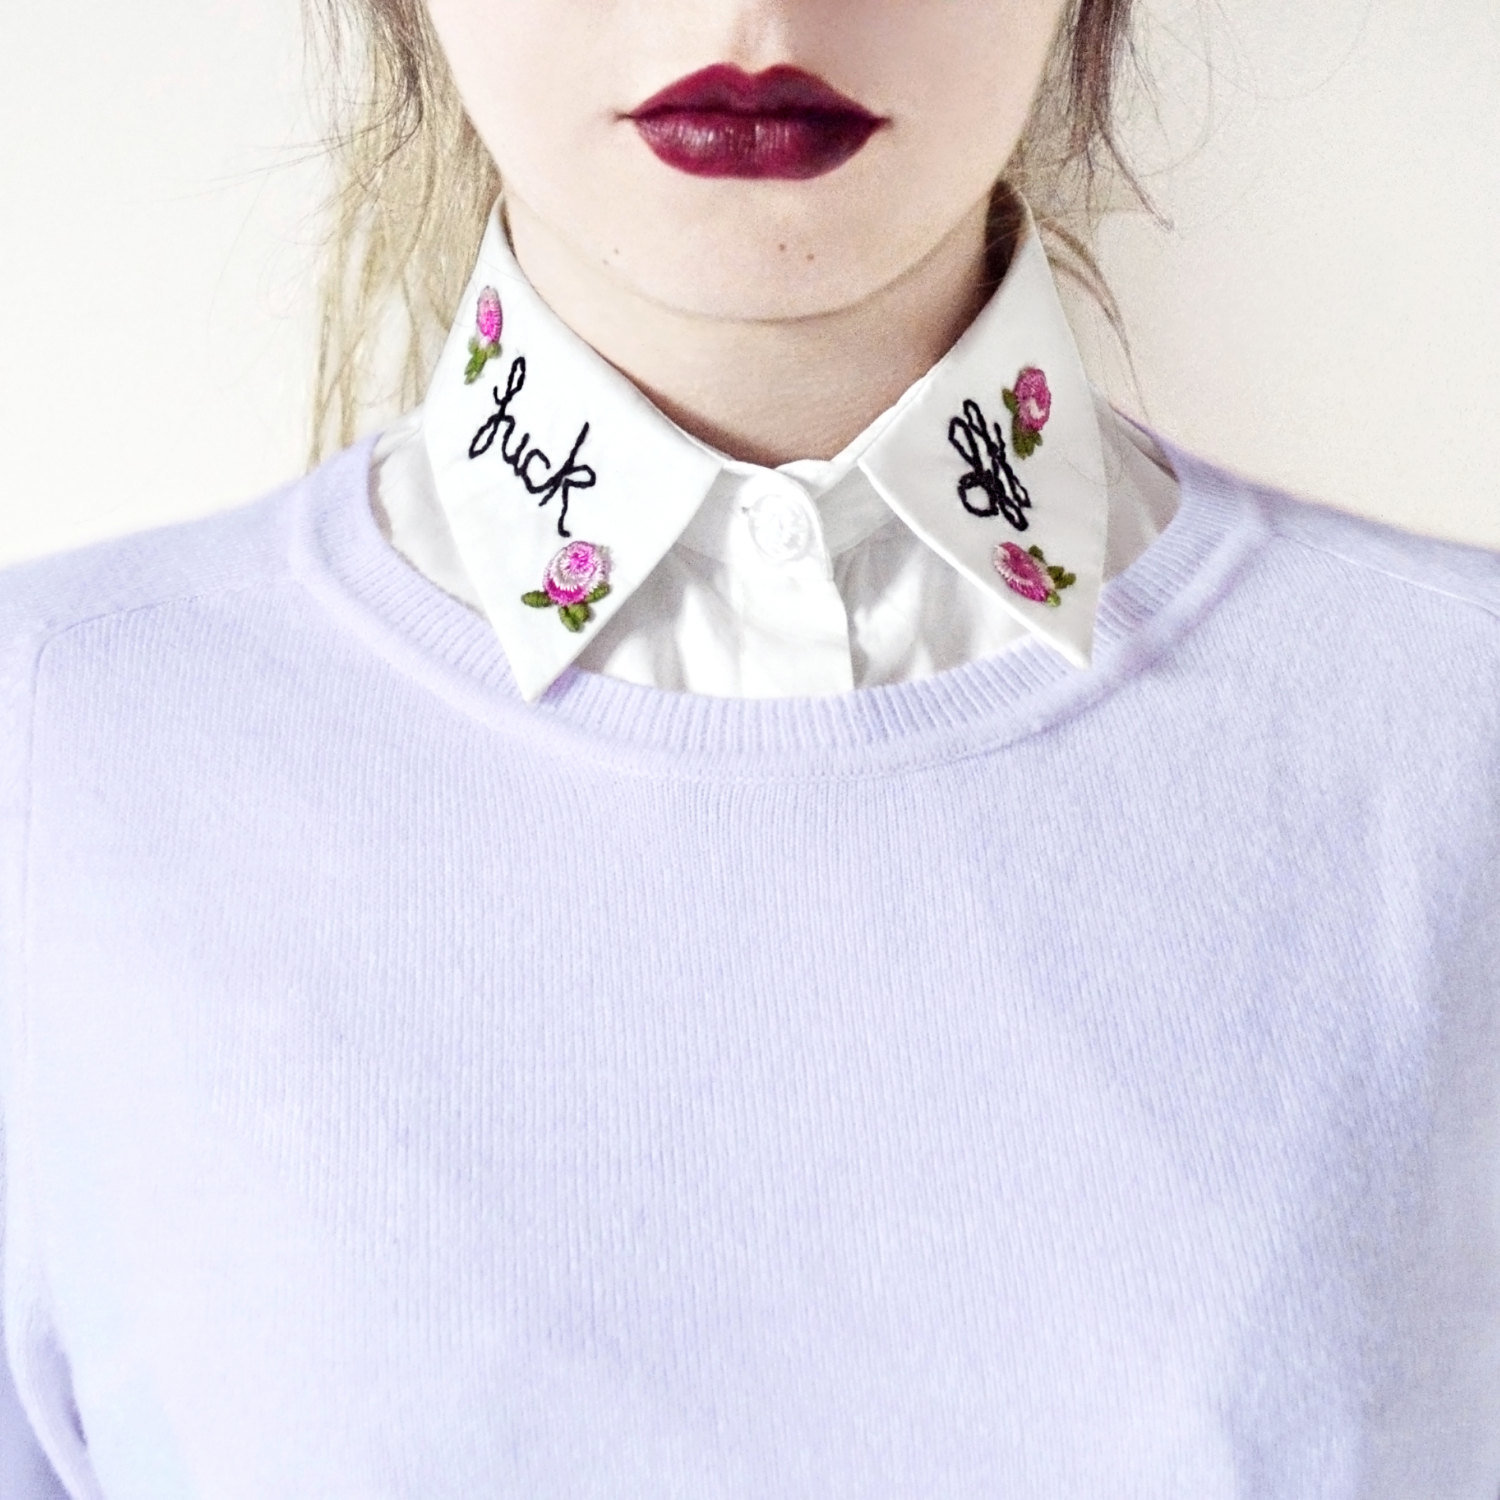 These Delicate Embroidered Collars Are 